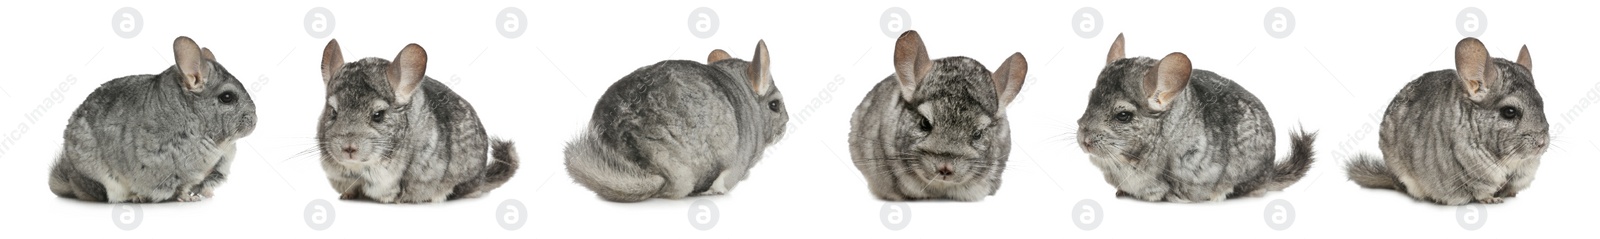 Image of Collage with cute grey chinchillas on white background. Banner design 